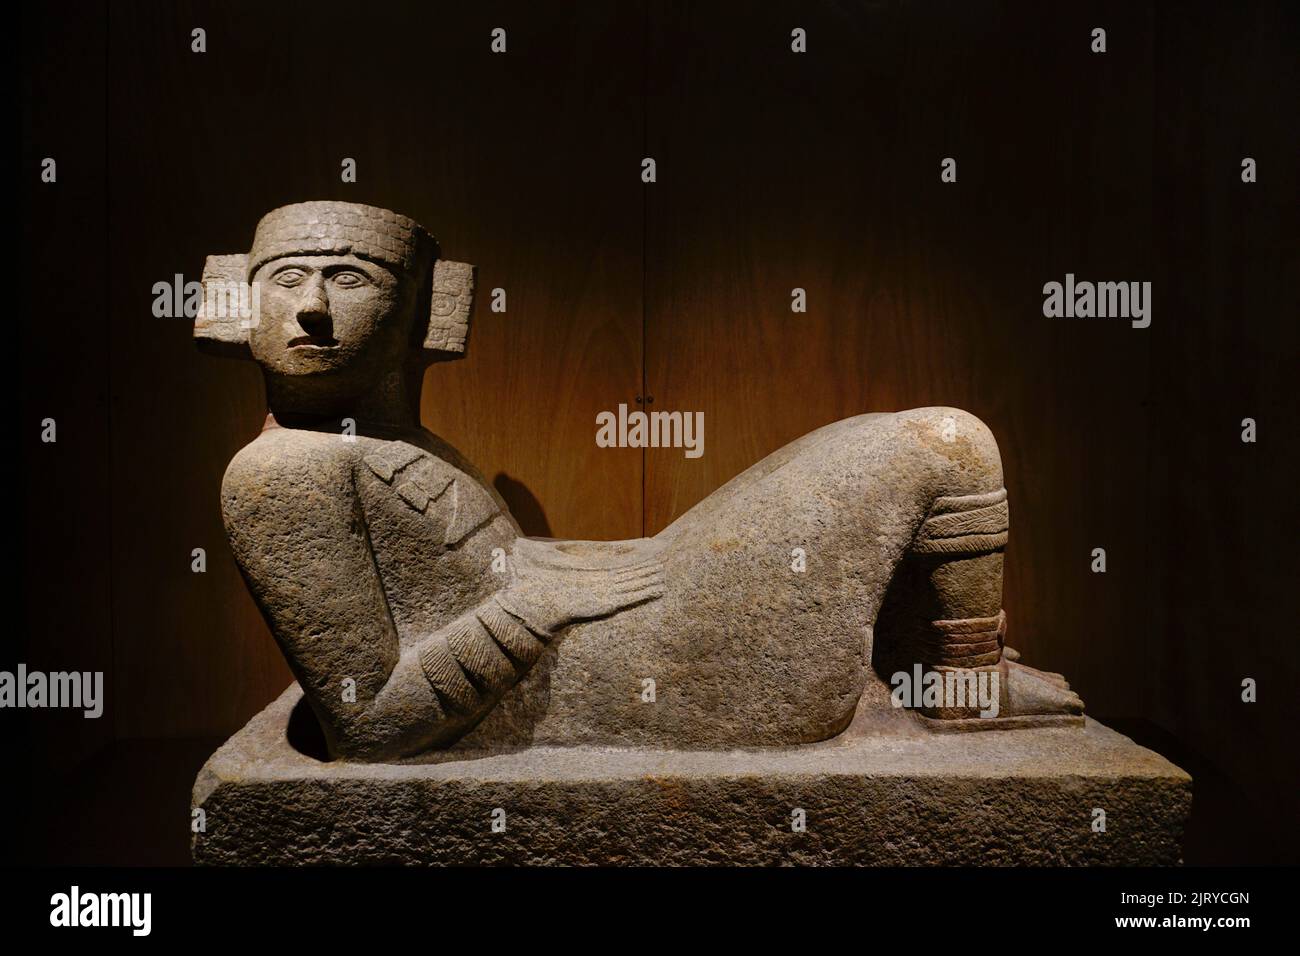 Chac Mool sculpture, National Anthroplogy Museum, Chapultepec Park, Mexico City, Mexico Stock Photo